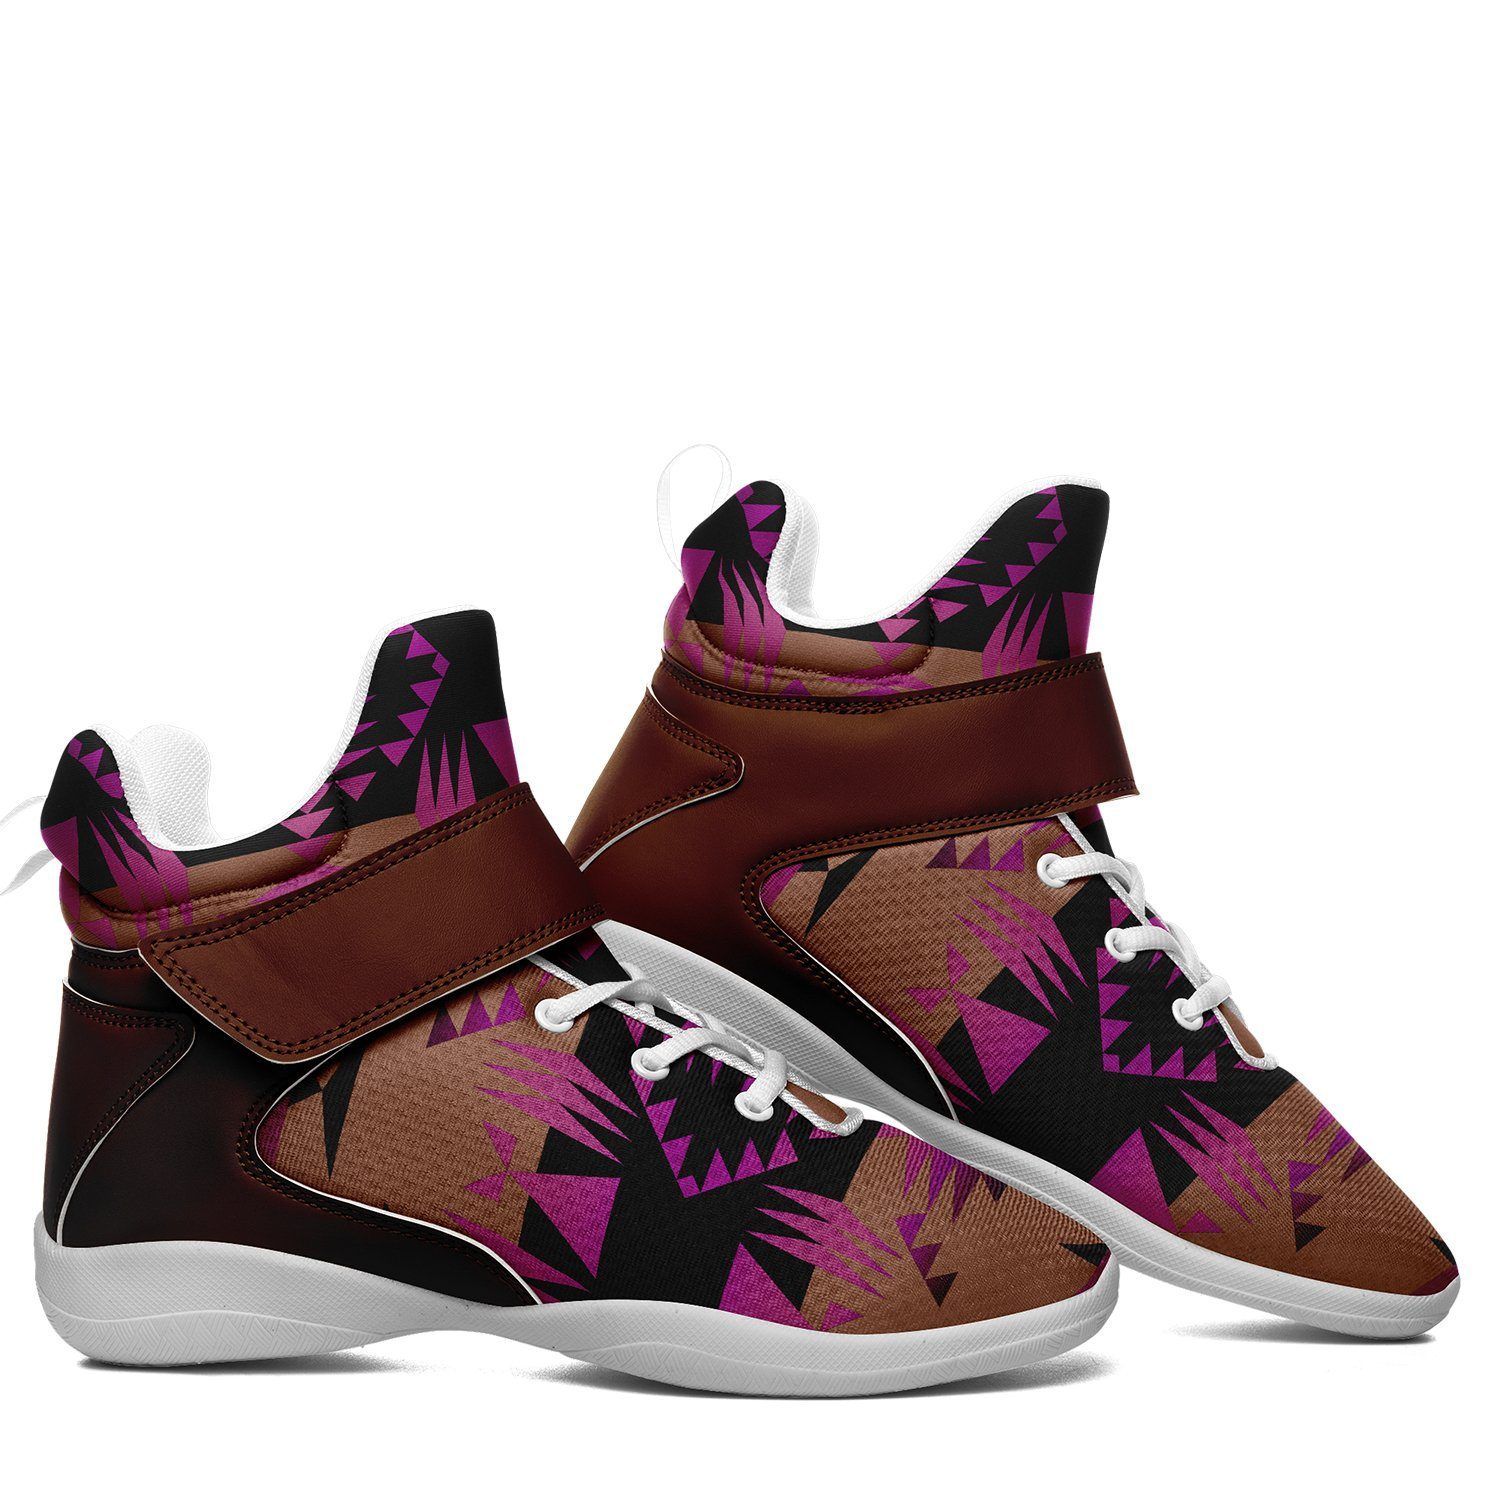 Between the Mountains Berry Kid's Ipottaa Basketball / Sport High Top Shoes 49 Dzine 